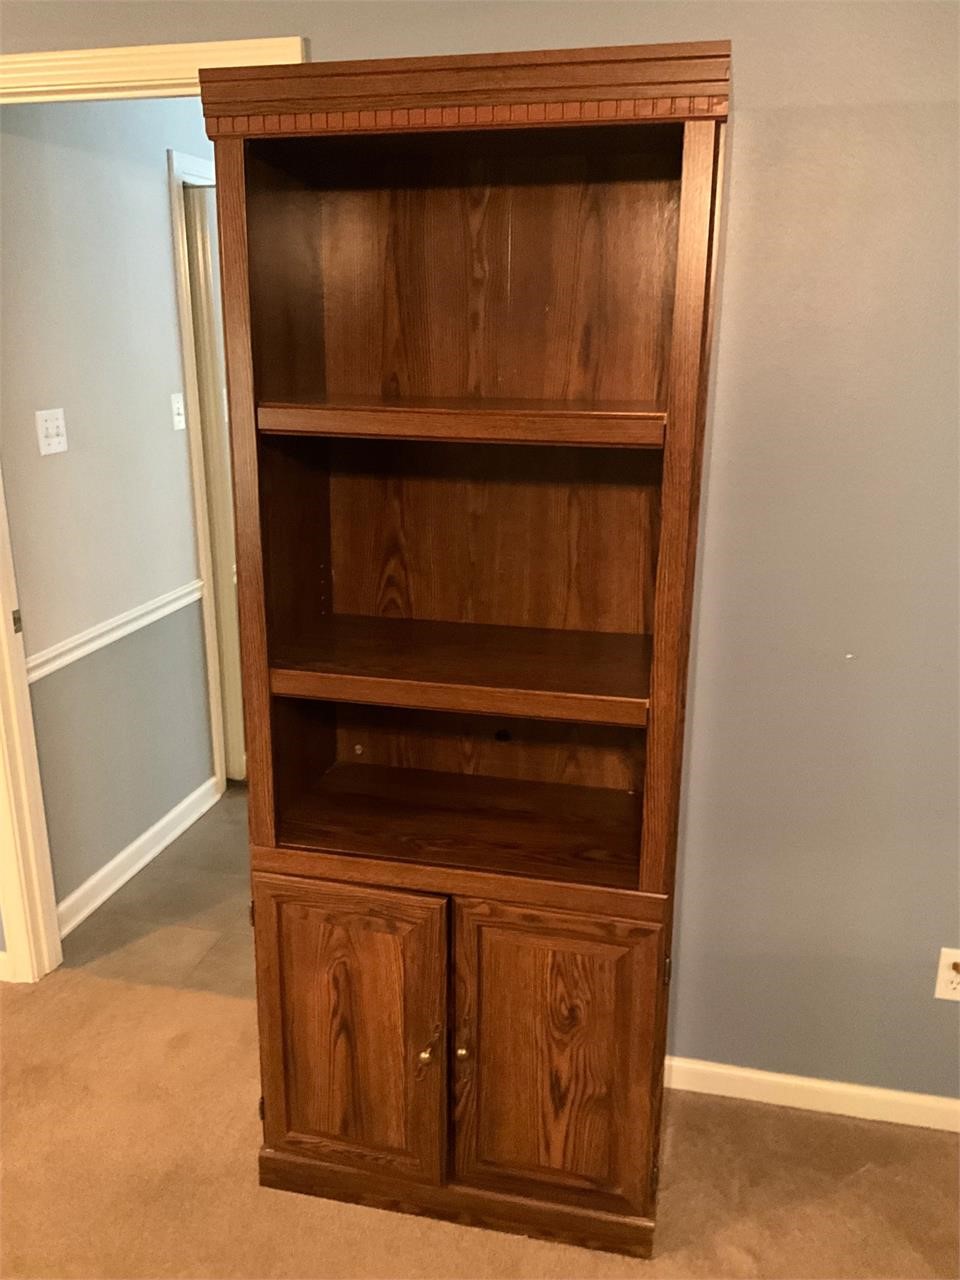 Wooden Bookcase- sizes in pics